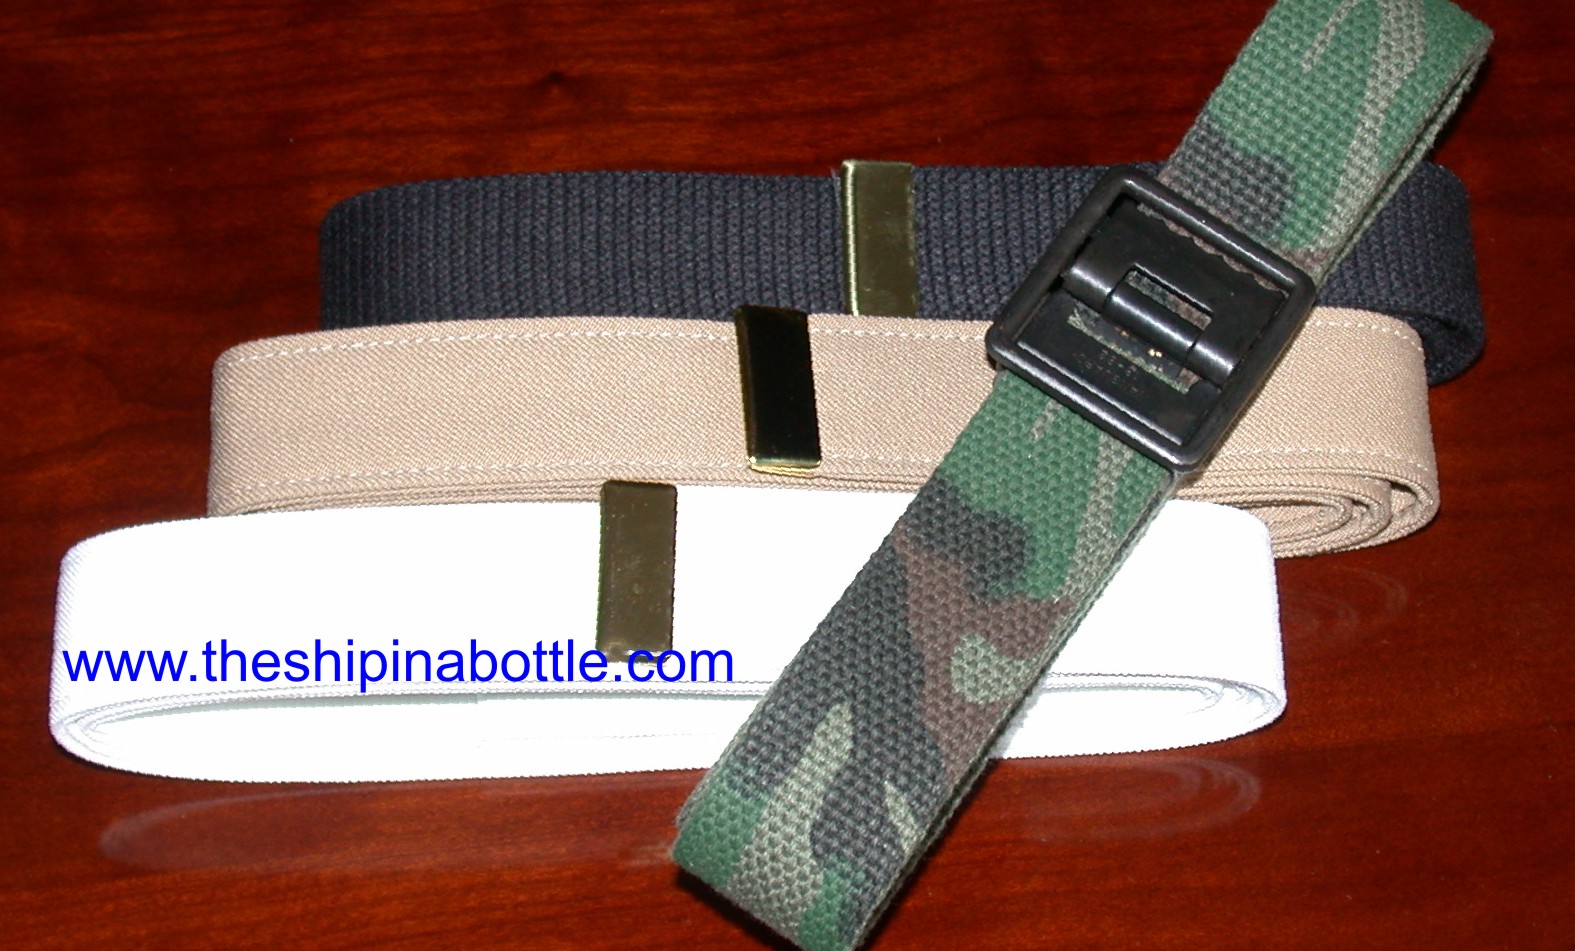 Authentic US Navy Belts - www.theshipinabottle.com